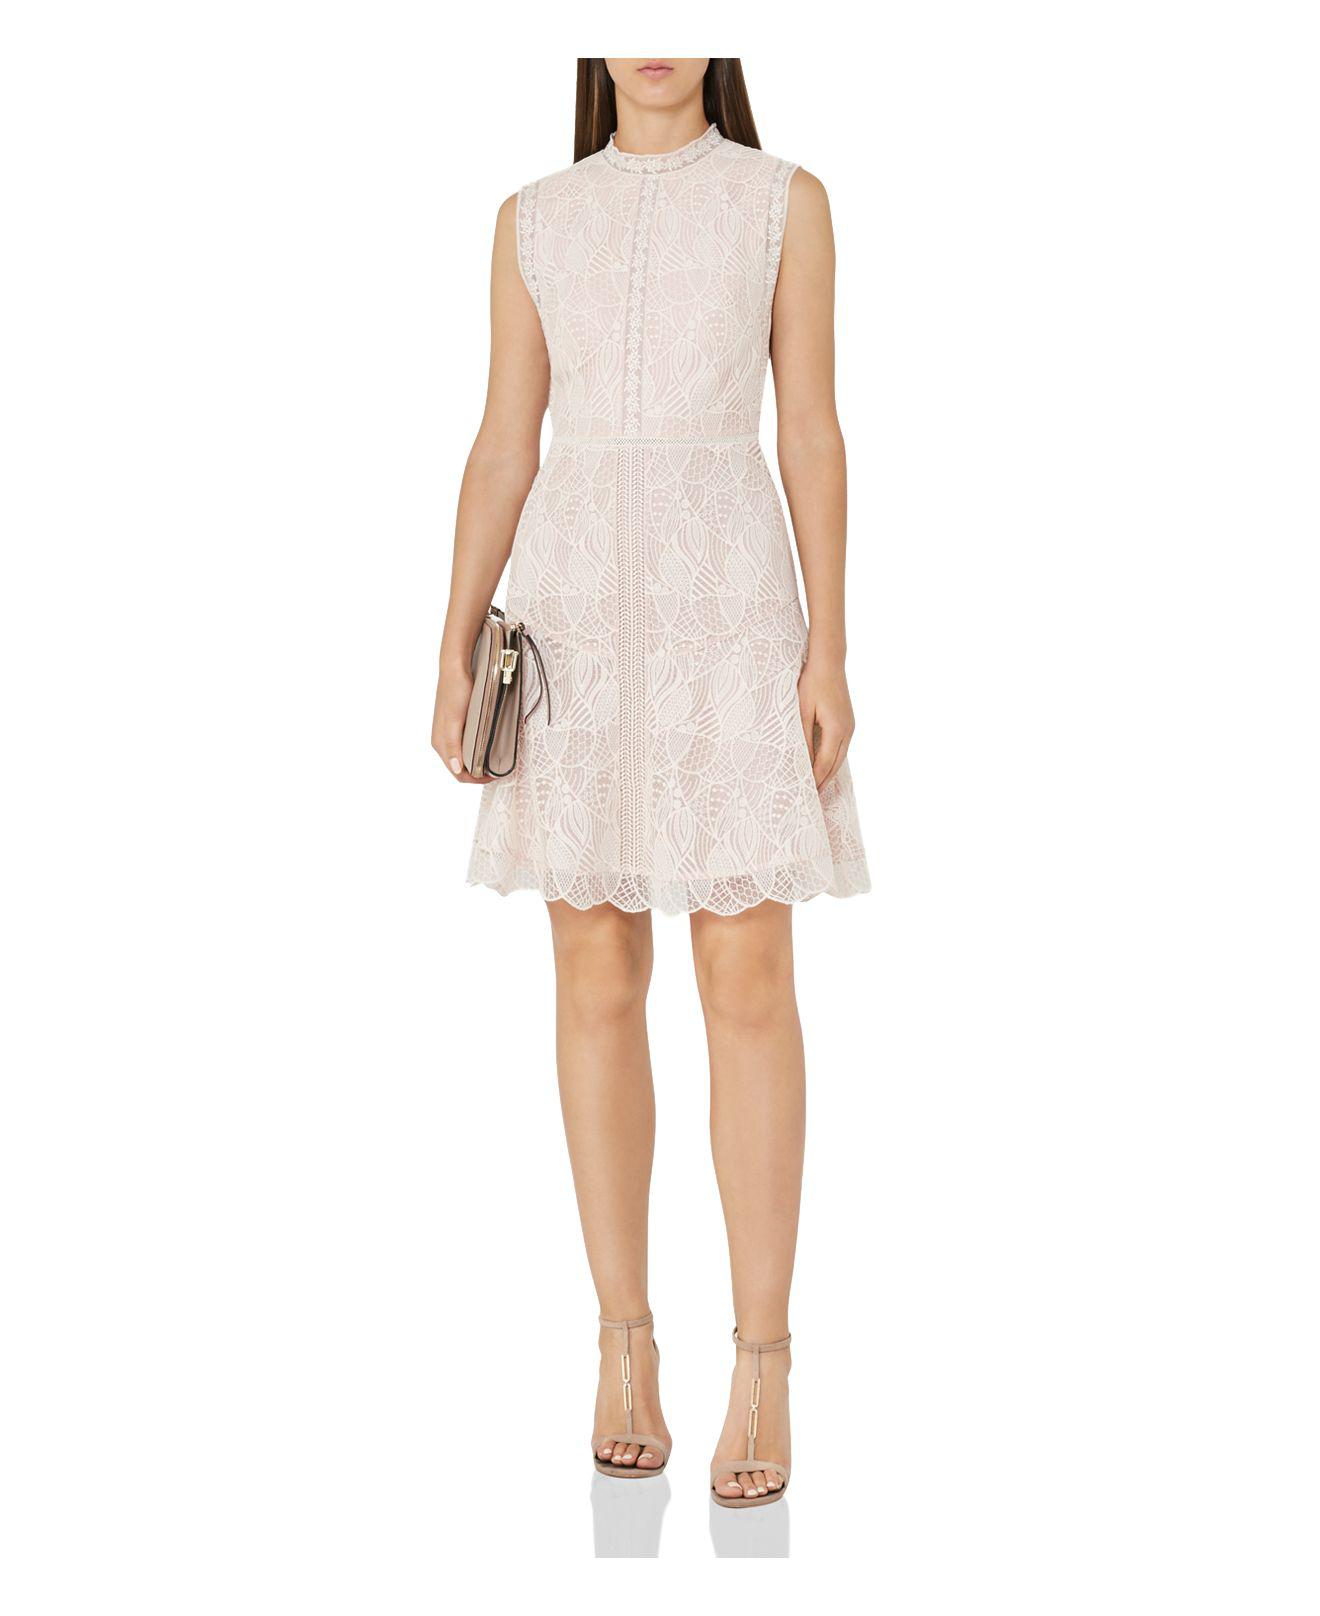 Reiss Tori Mixed-lace Dress in Pink - Lyst